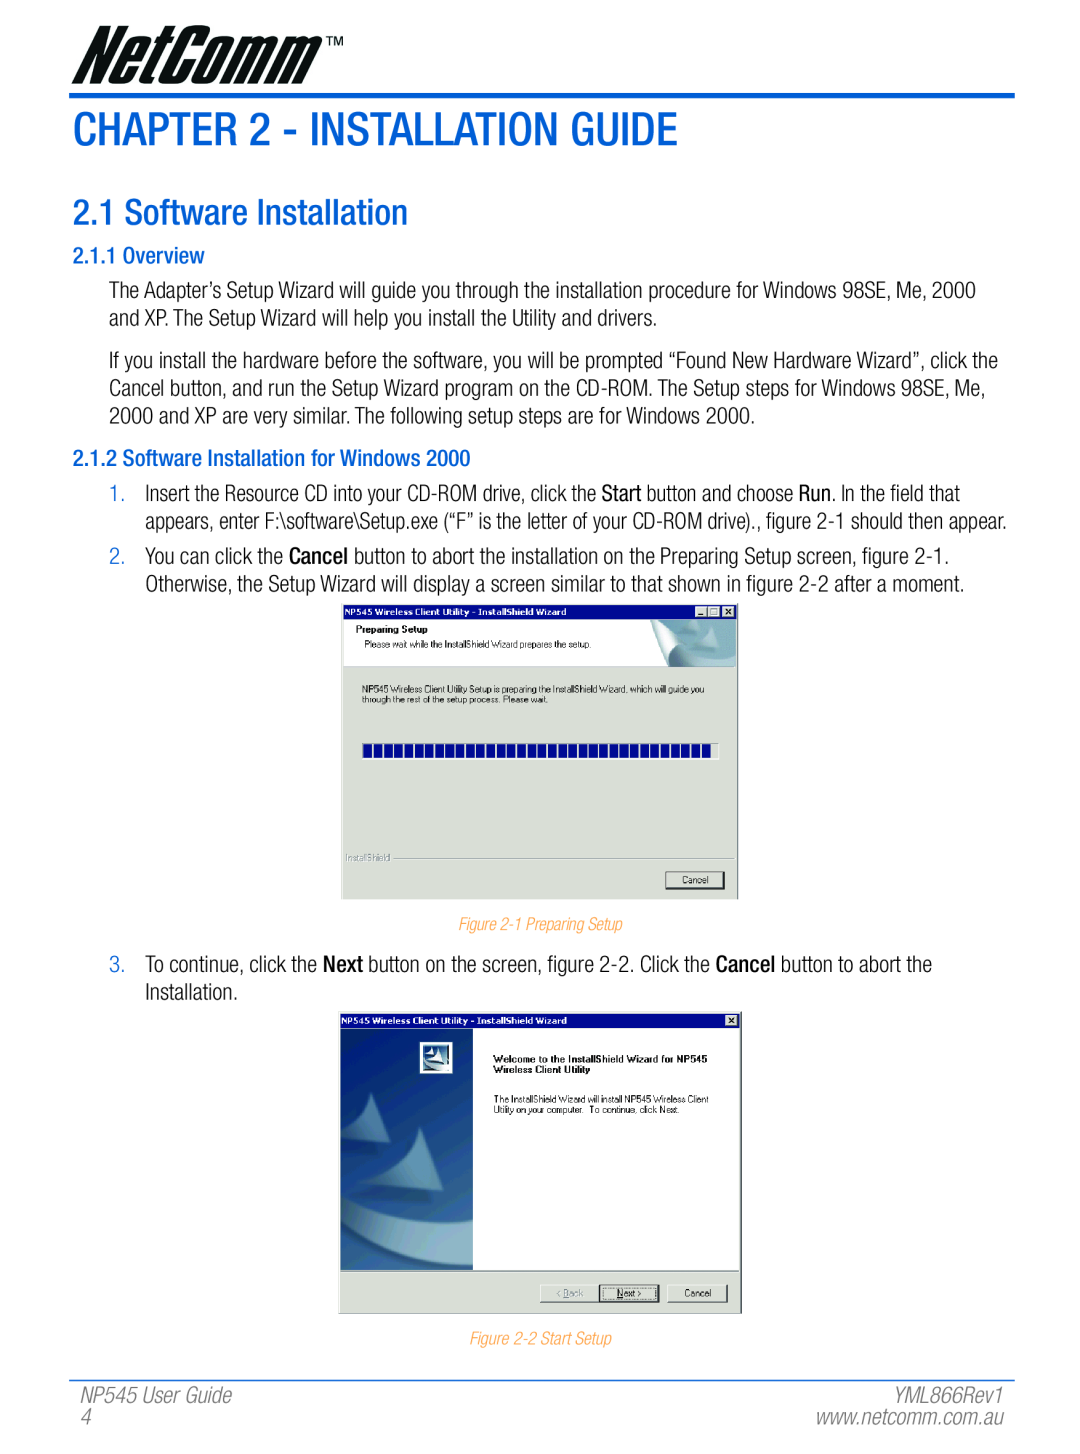 NetComm manual Installation Guide, Overview, Software Installation for Windows, NP545 User Guide, YML866Rev1 